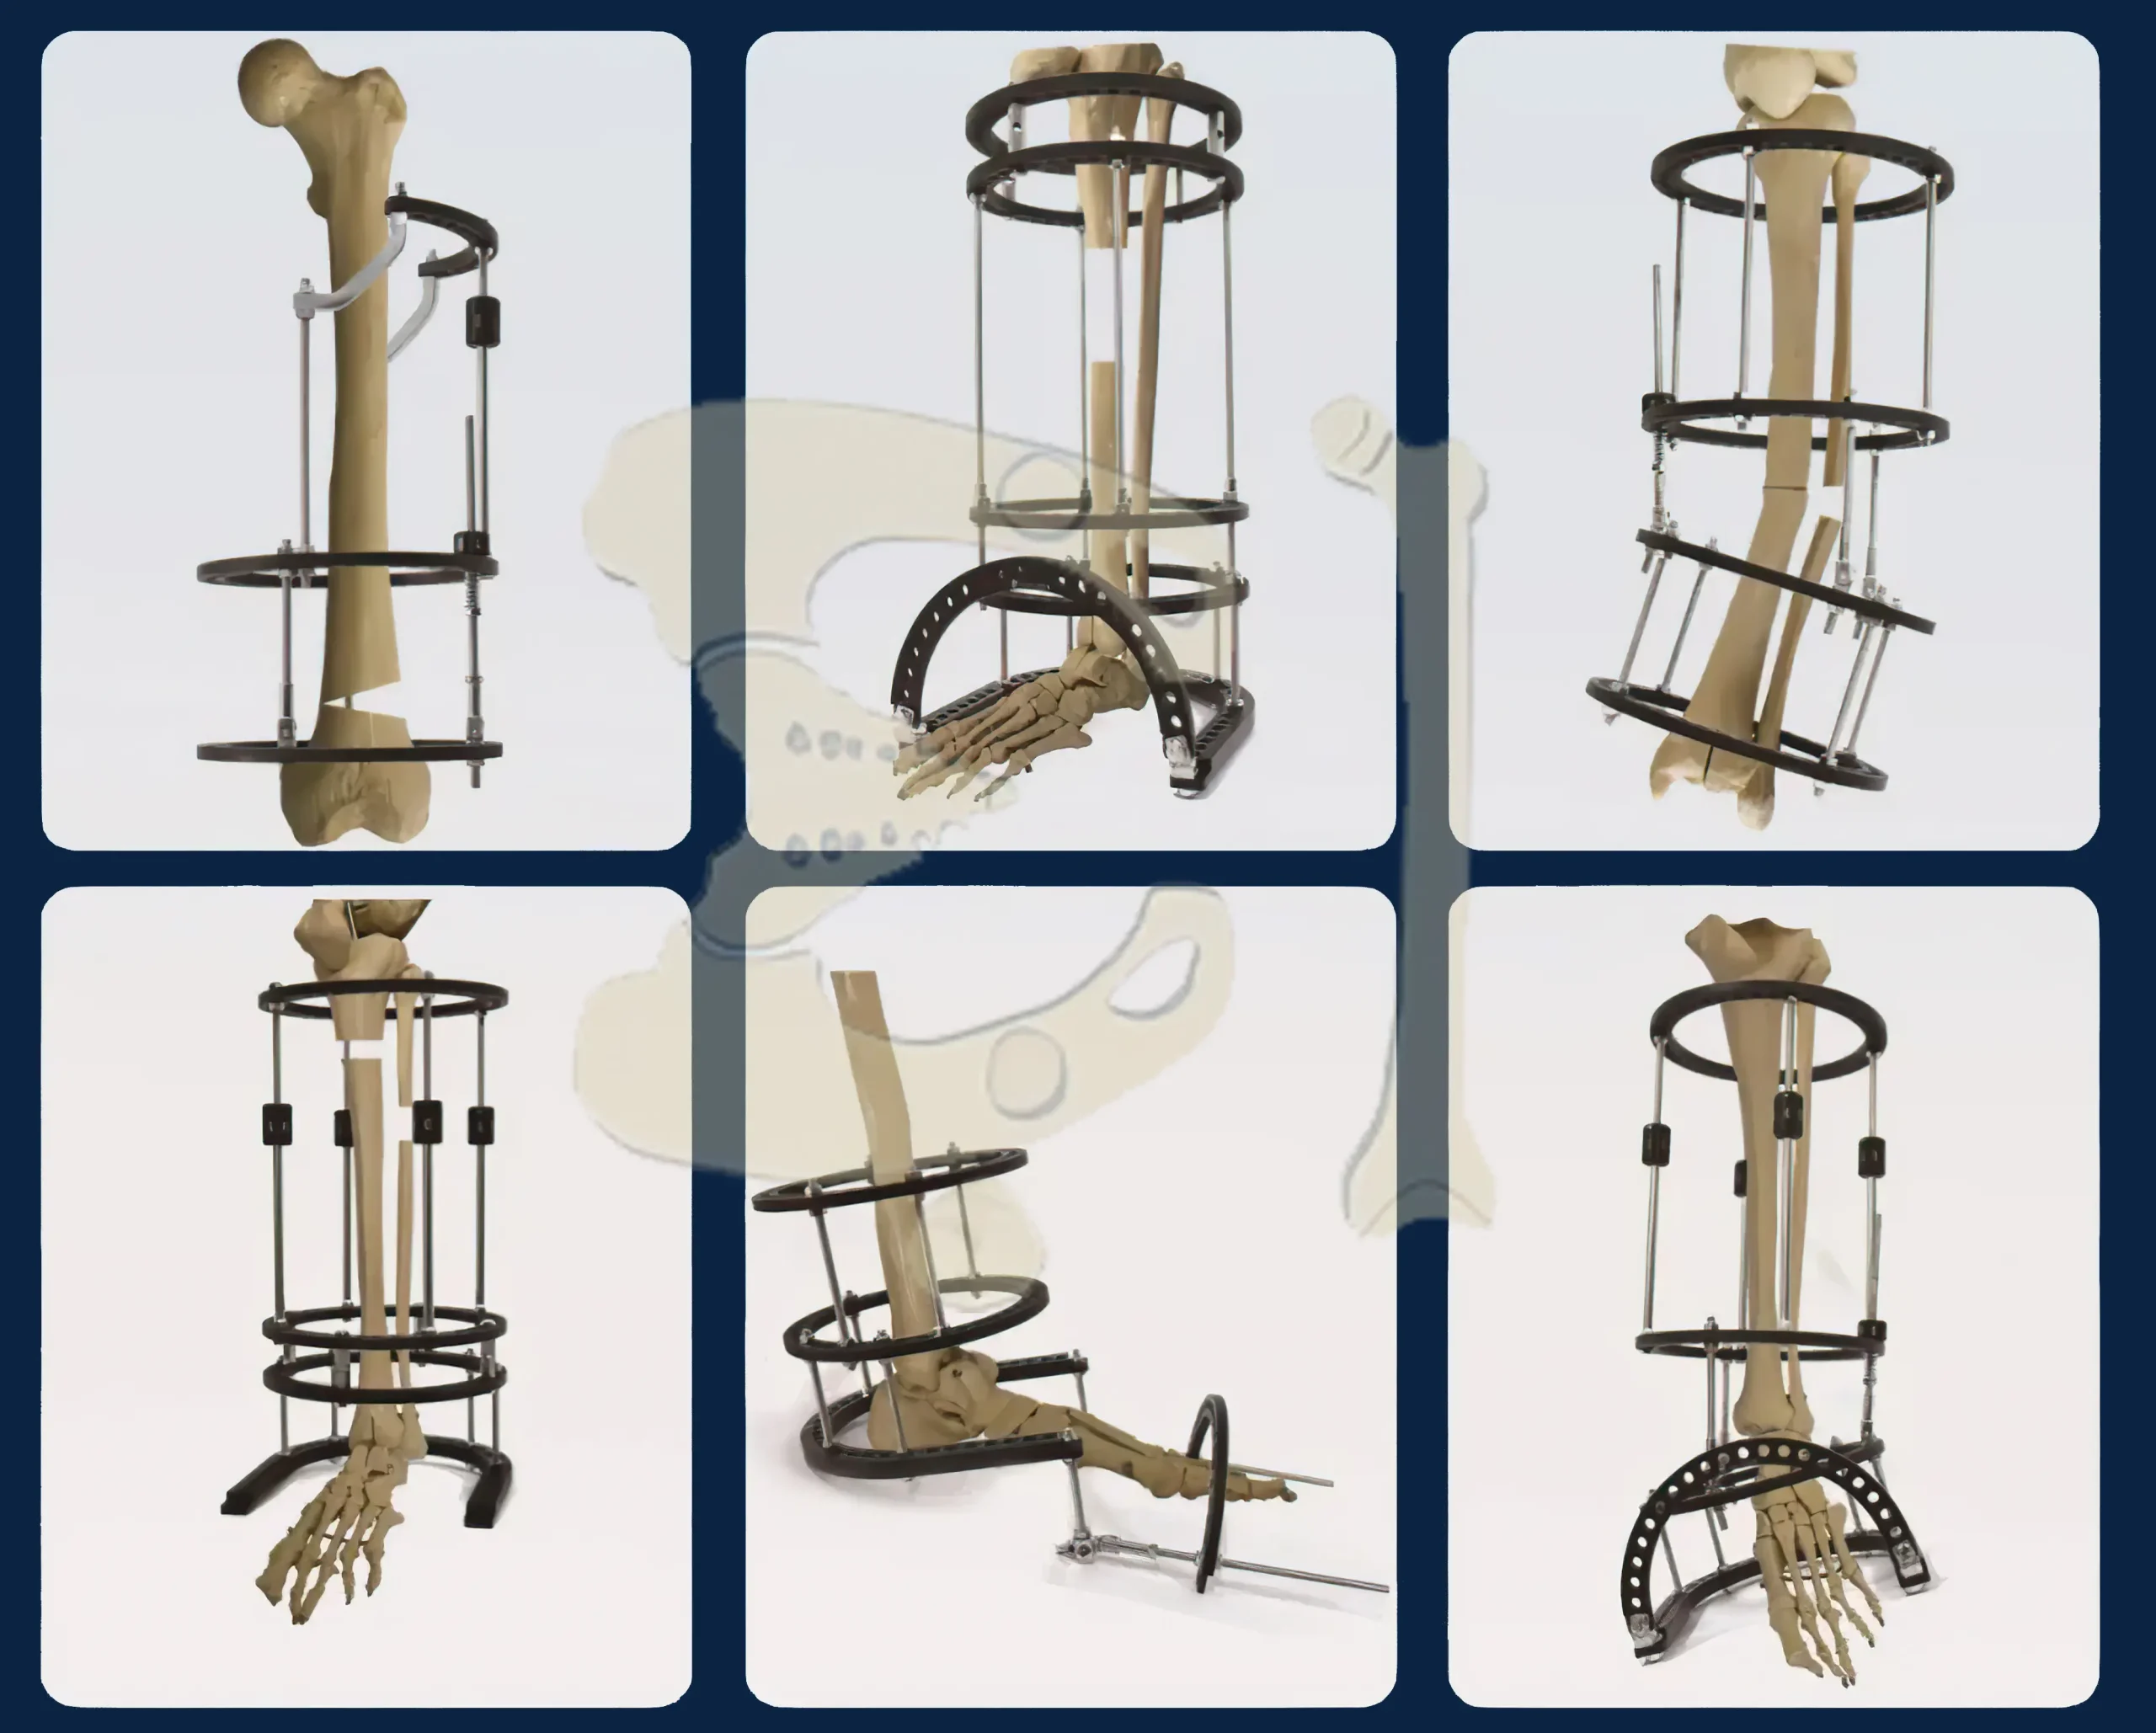 From the picture, we can see the shape of the Ilizarov device and how it is fixed for different bone fractures